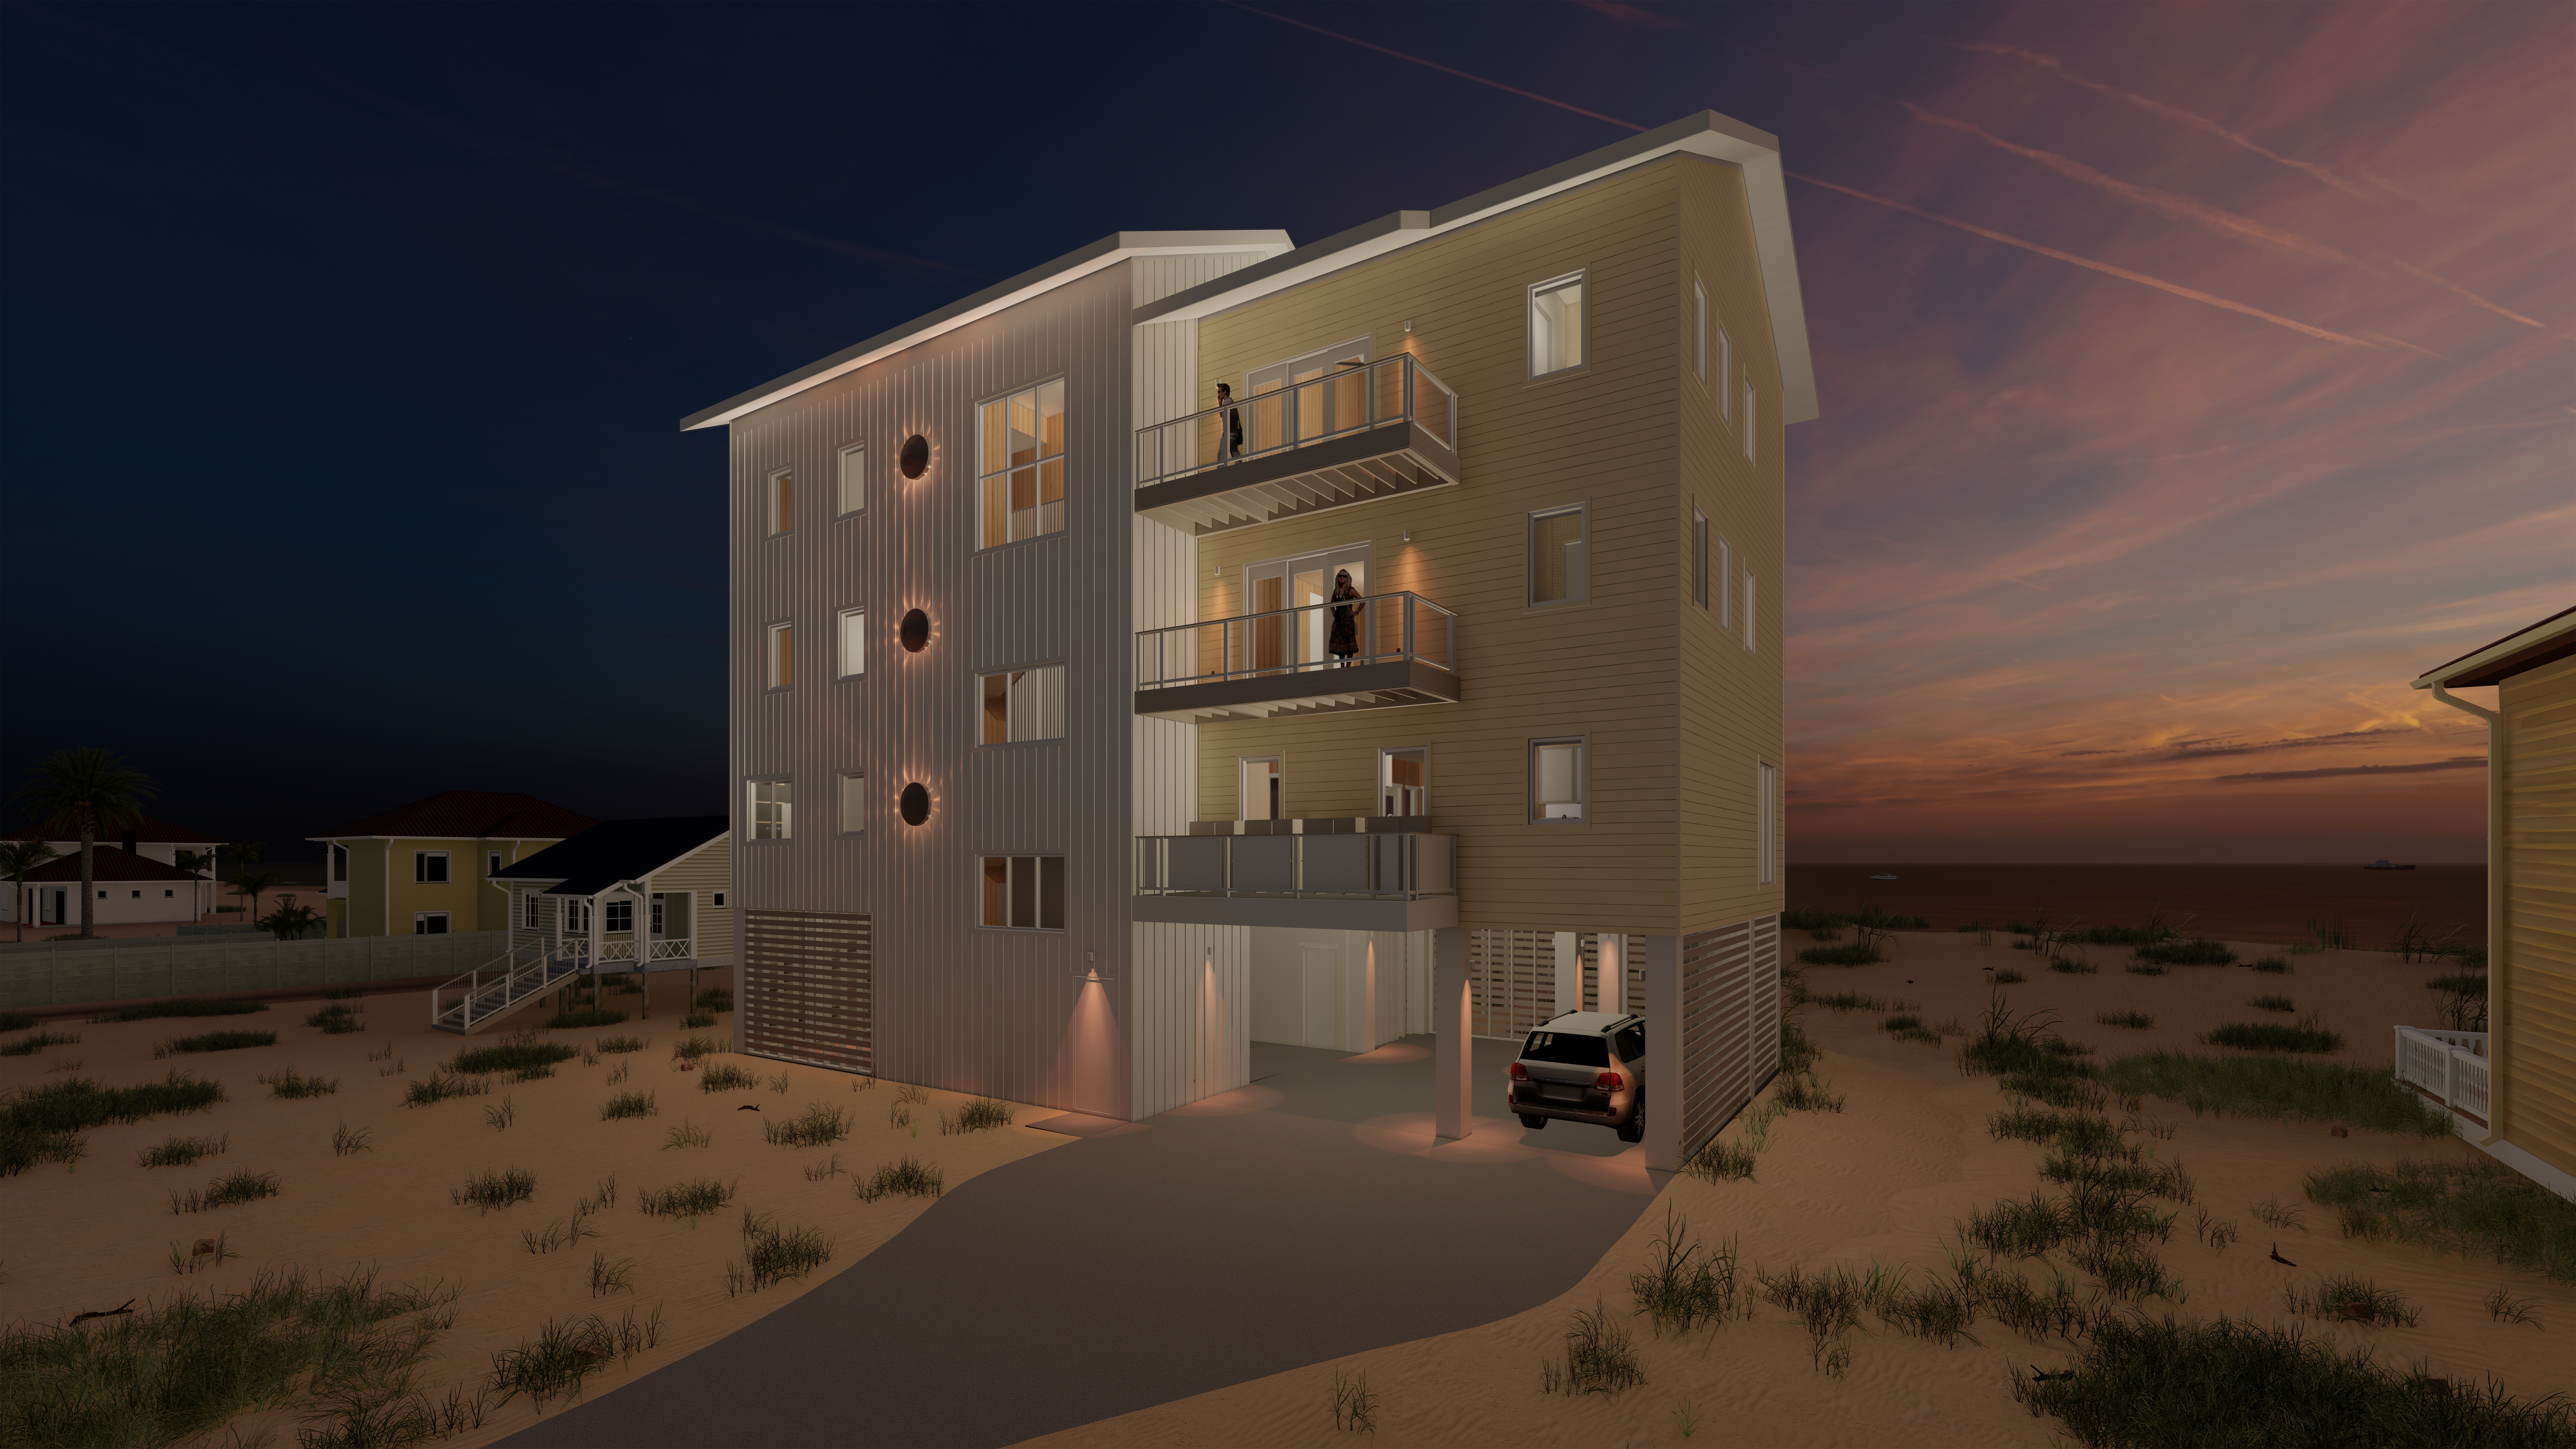 Nighttime rendering of a beach house with the ocean in the background.